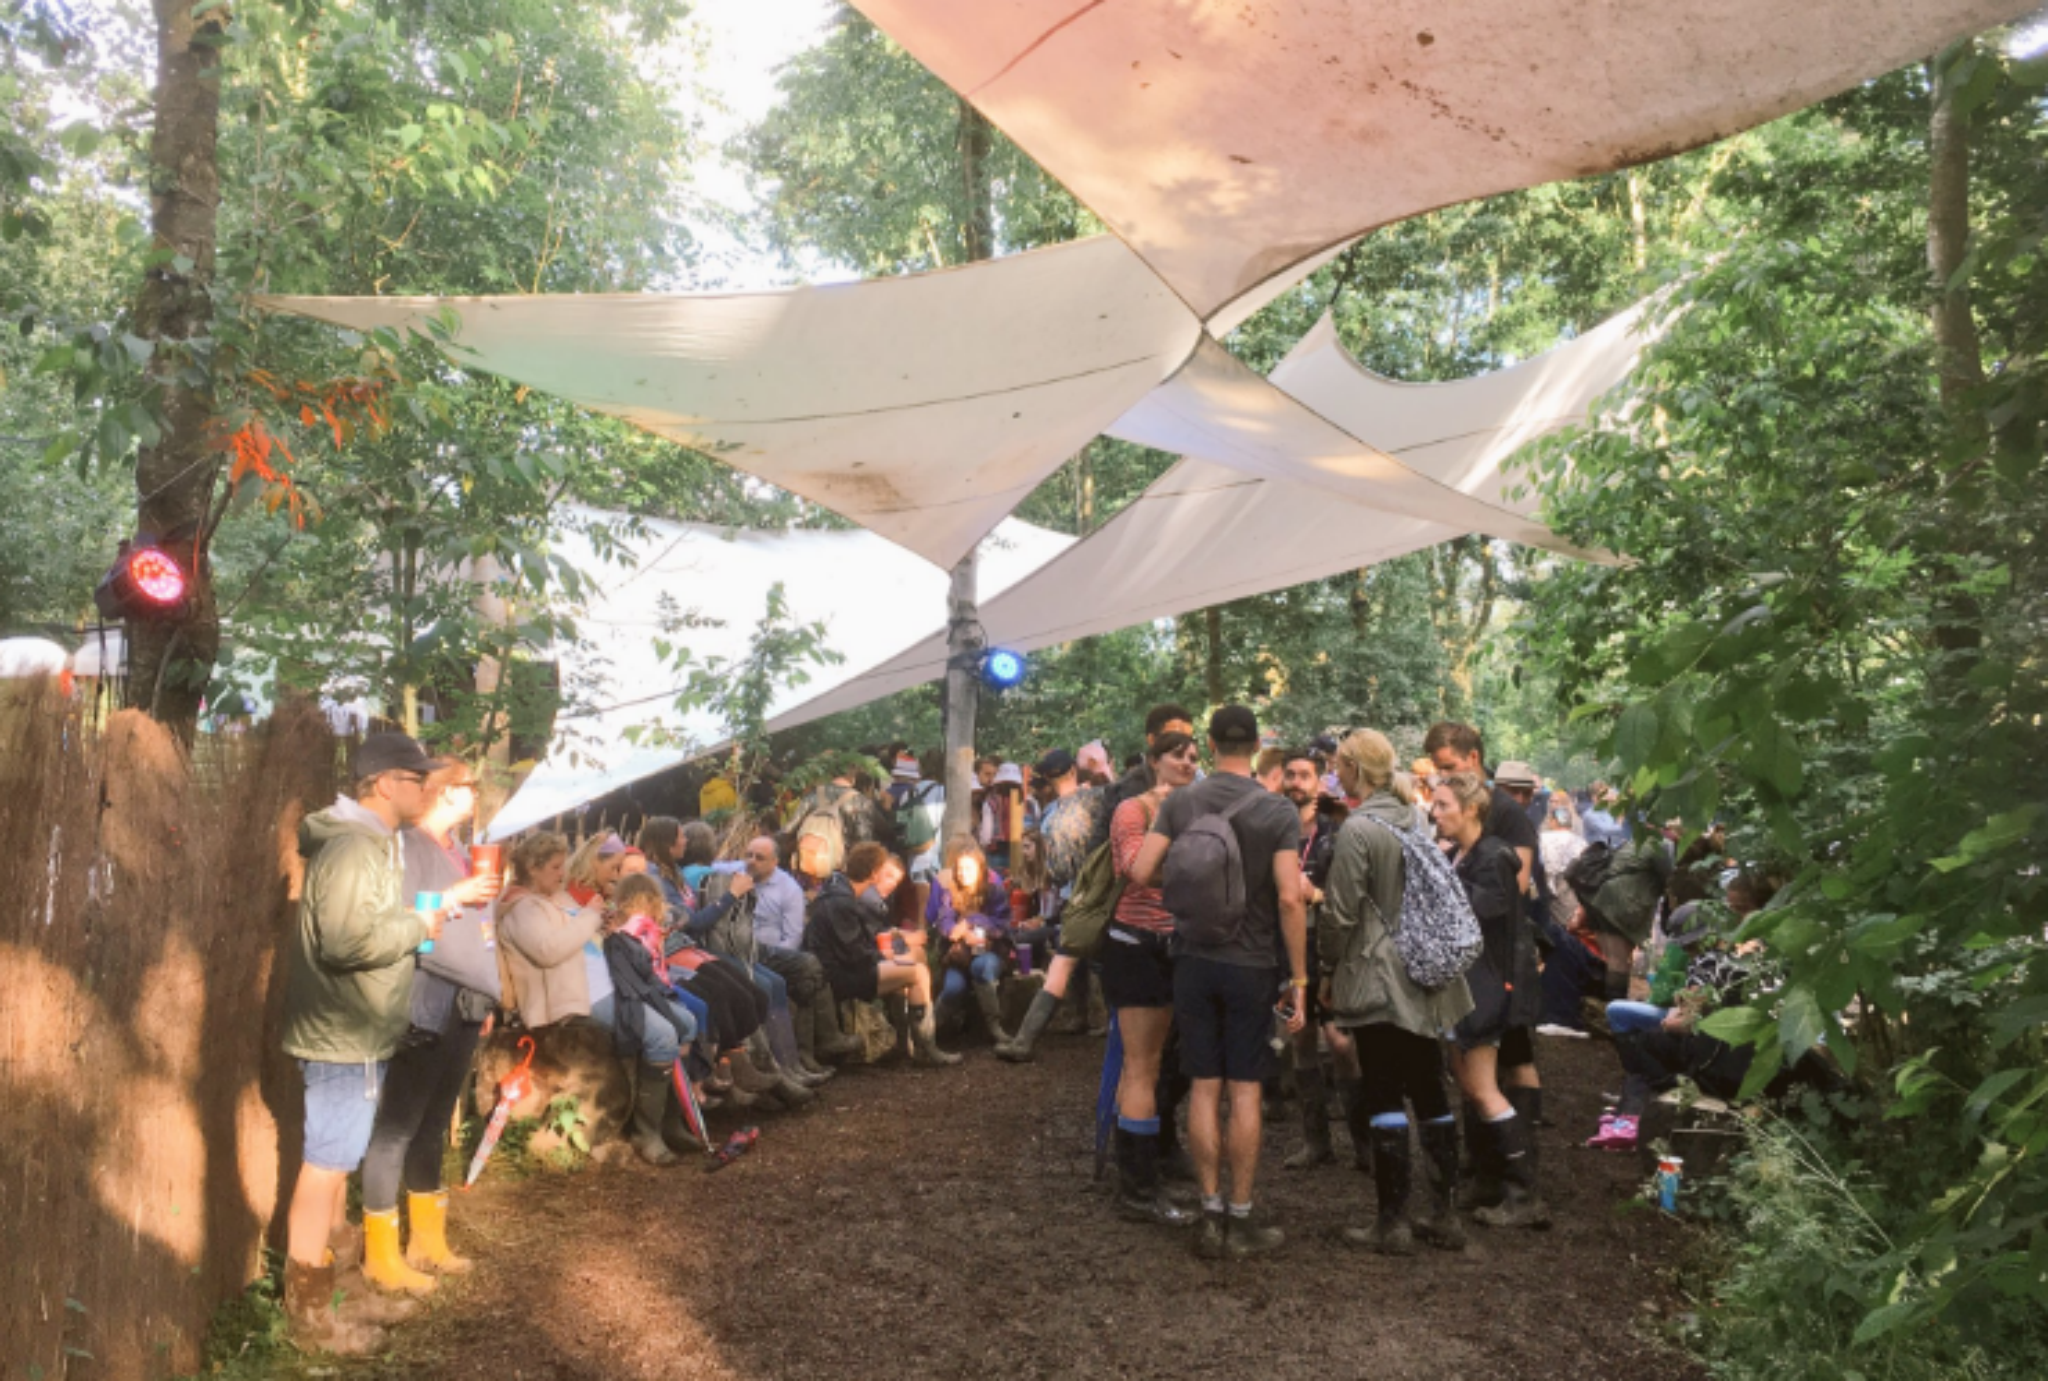 The Woods stage is new for Glastonbury 2016